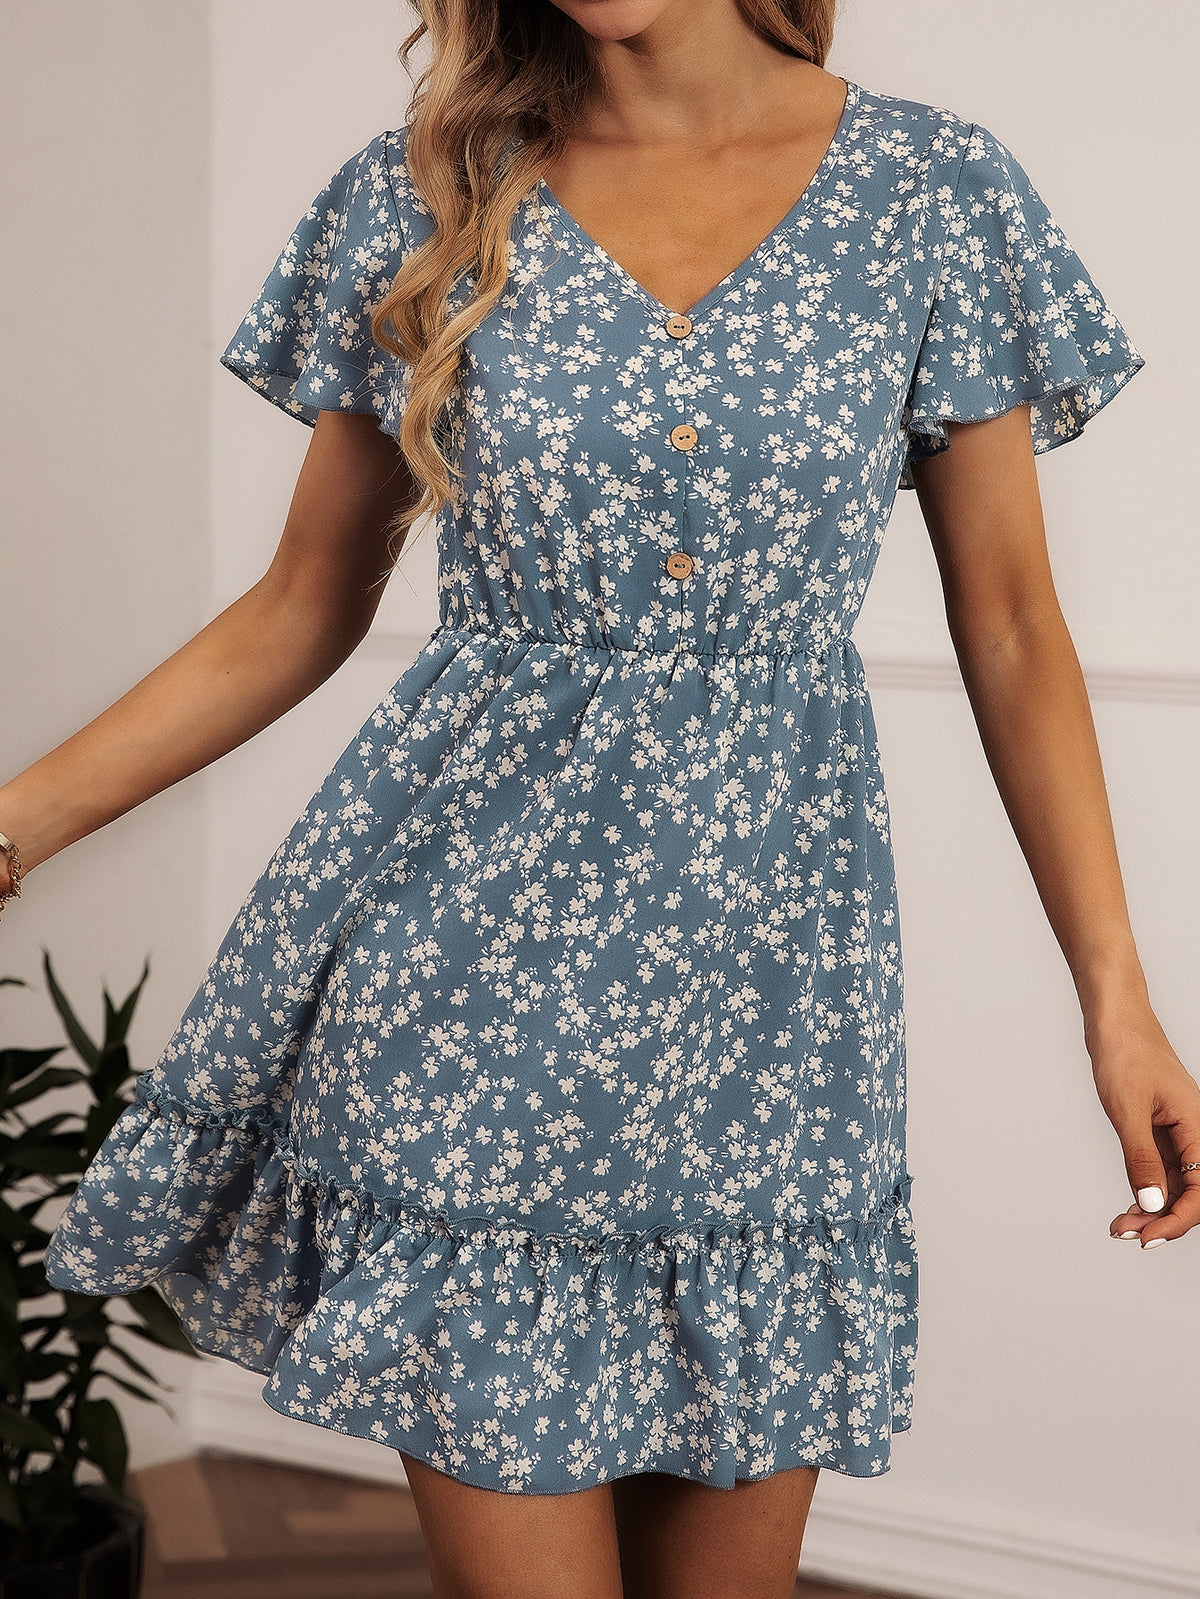 Floral Print Dress with Ruffle - Dusty Blue / XL